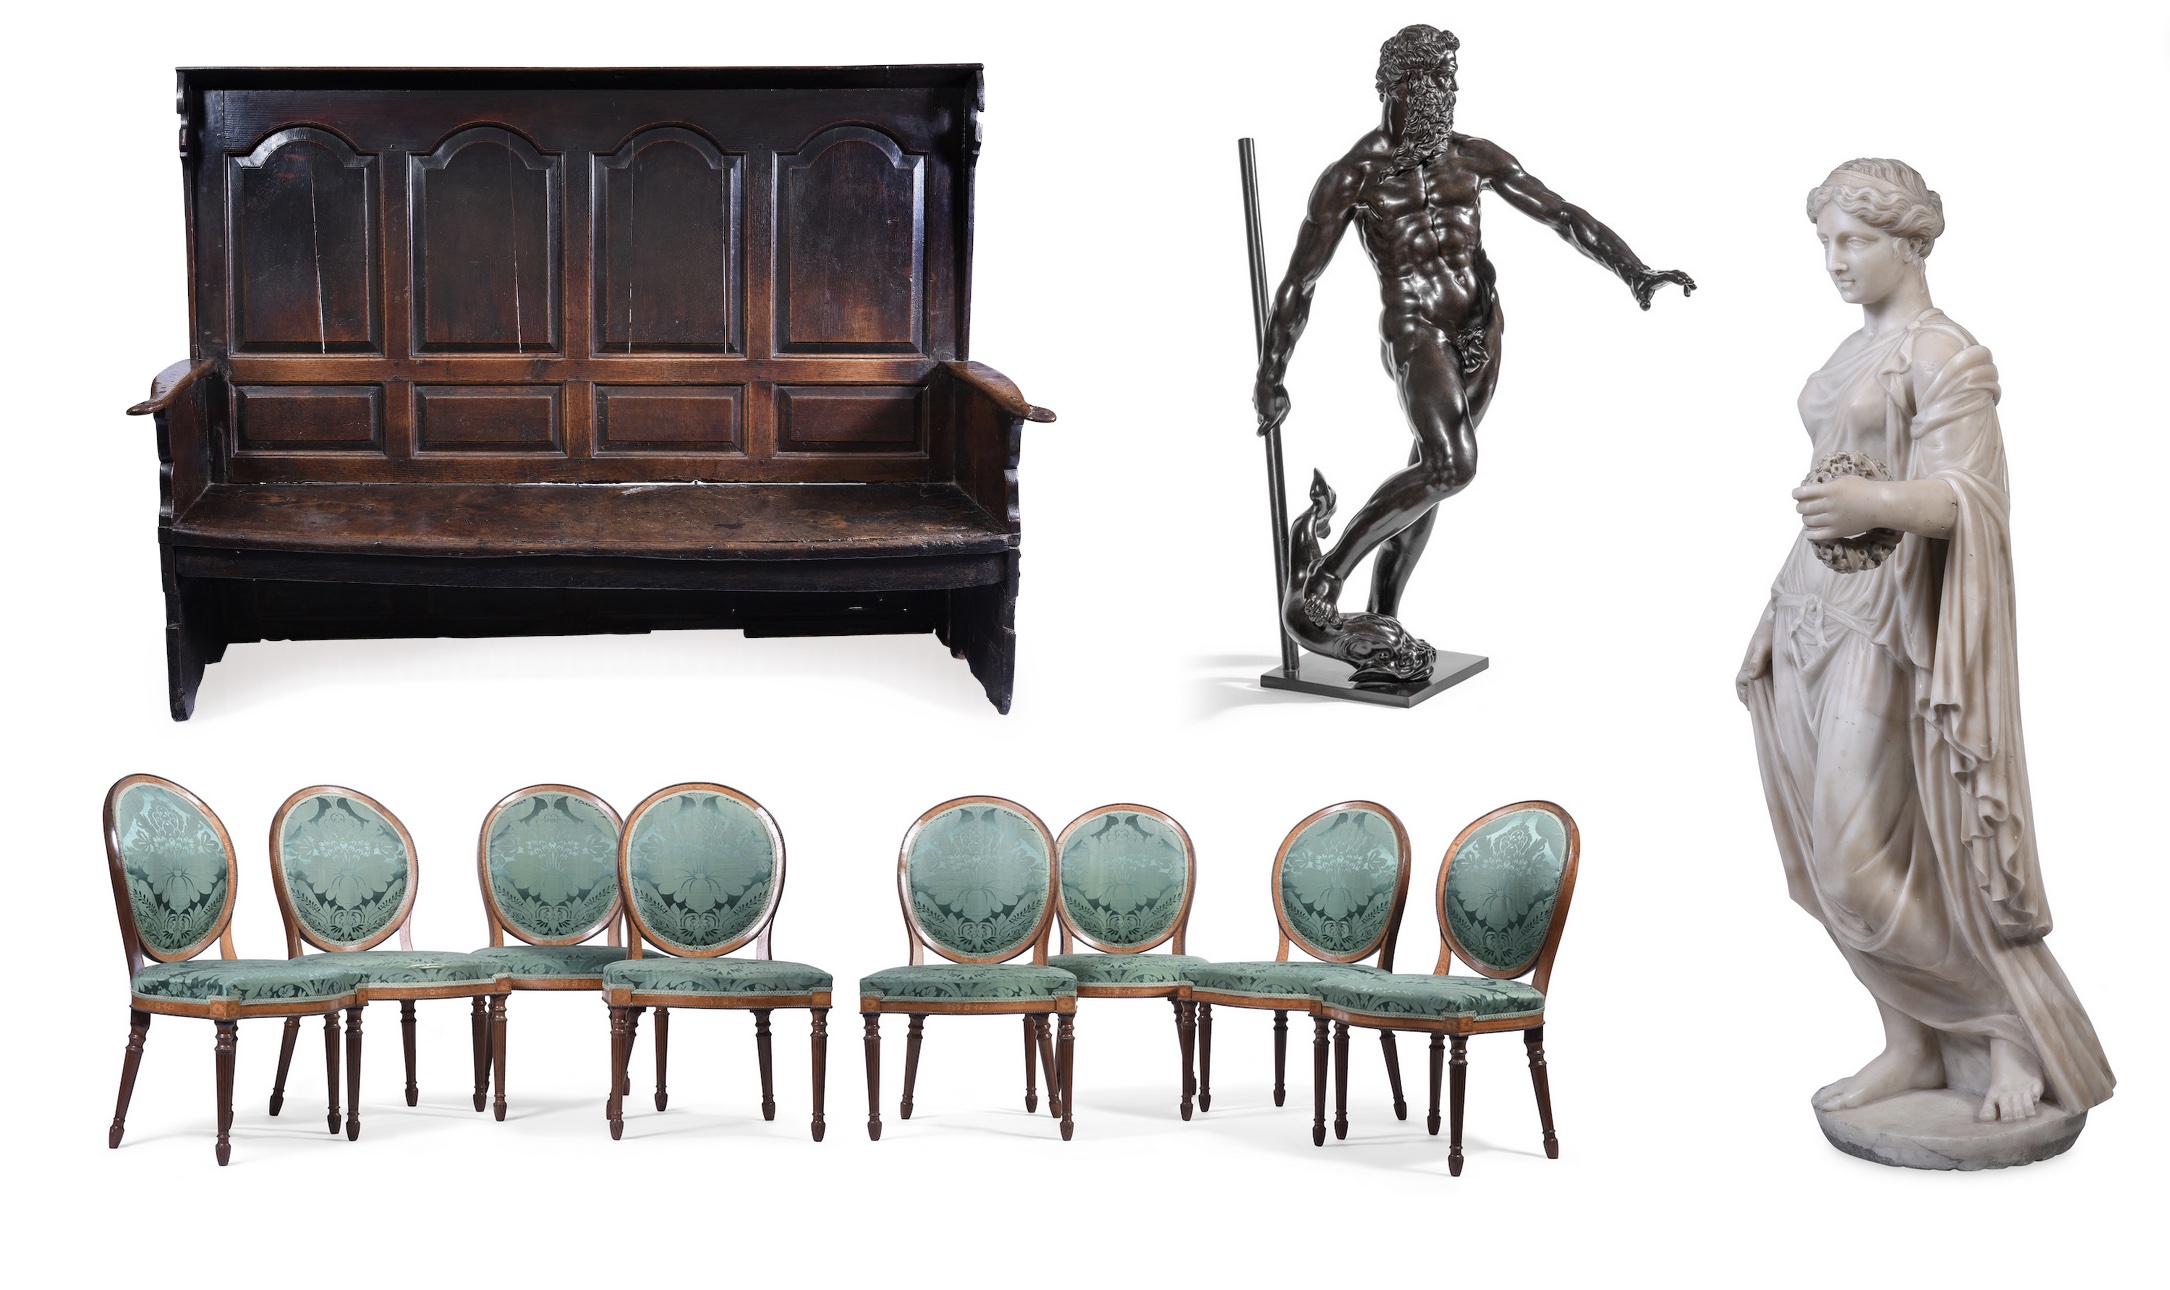 Items from Tomasso collection at Dreweatts – Antique Collecting